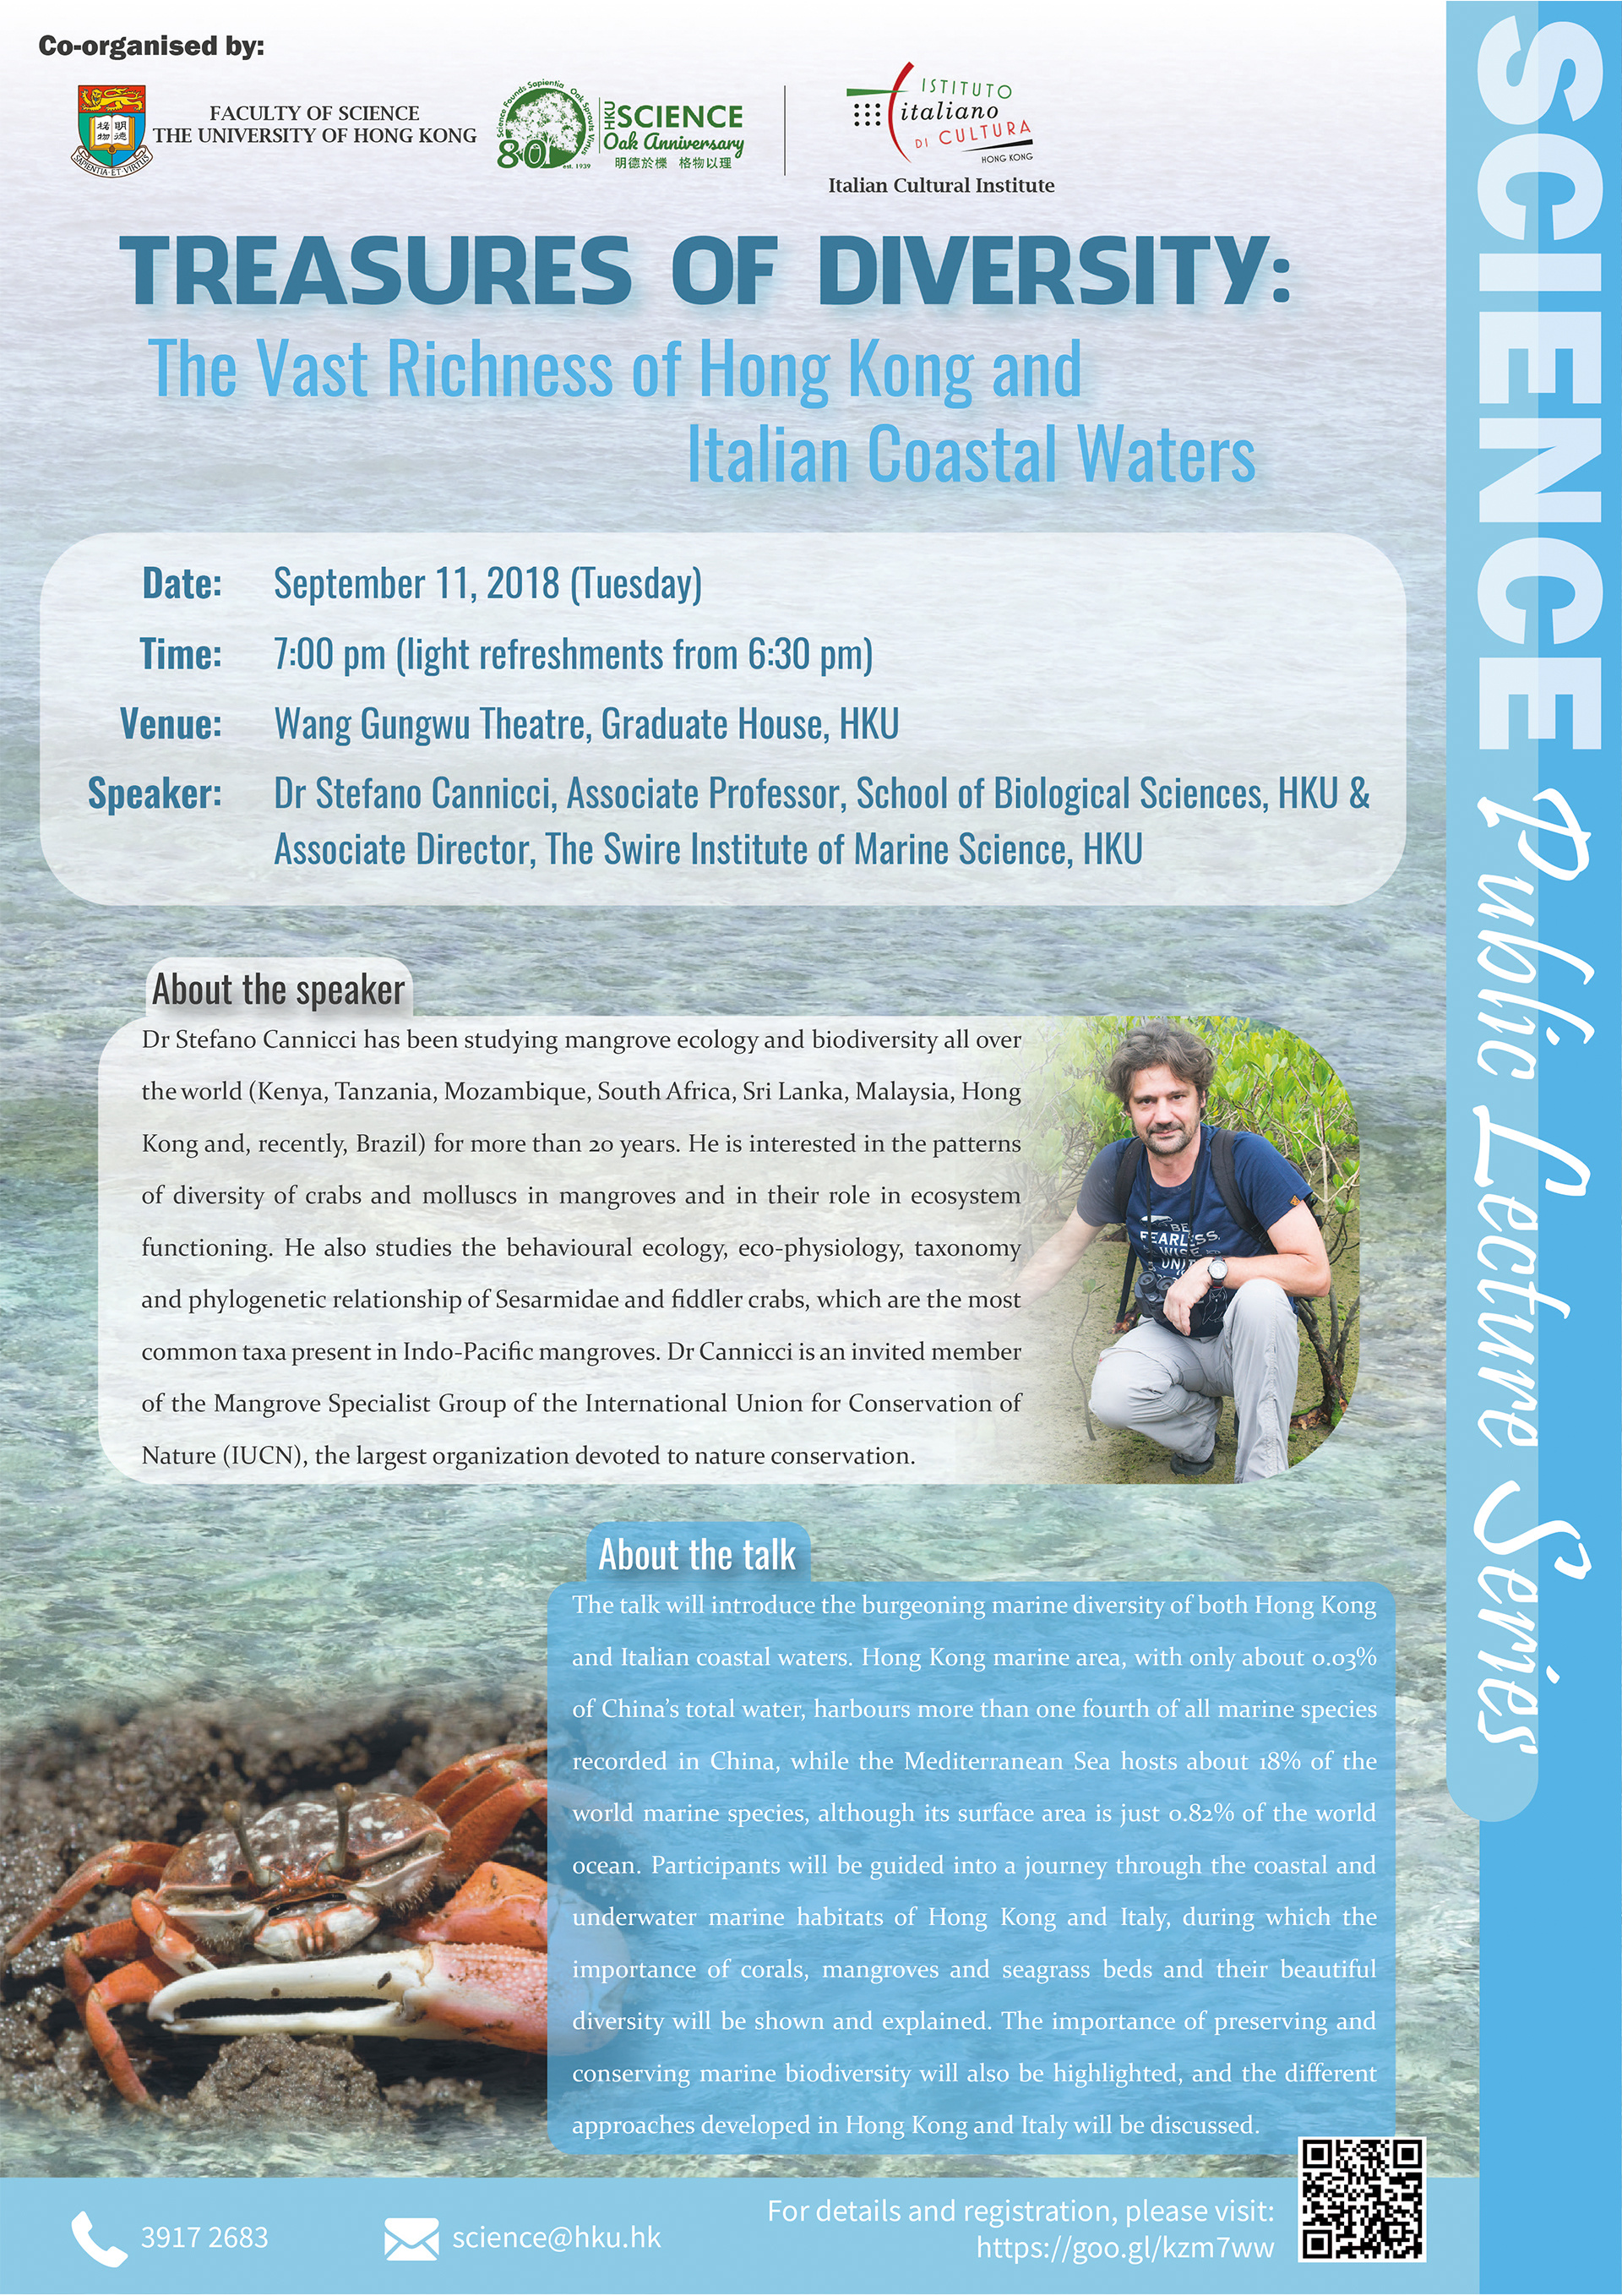 Public Lecture: Treasures of Diversity: The Vast Richness of Hong Kong and Italian Coastal Waters